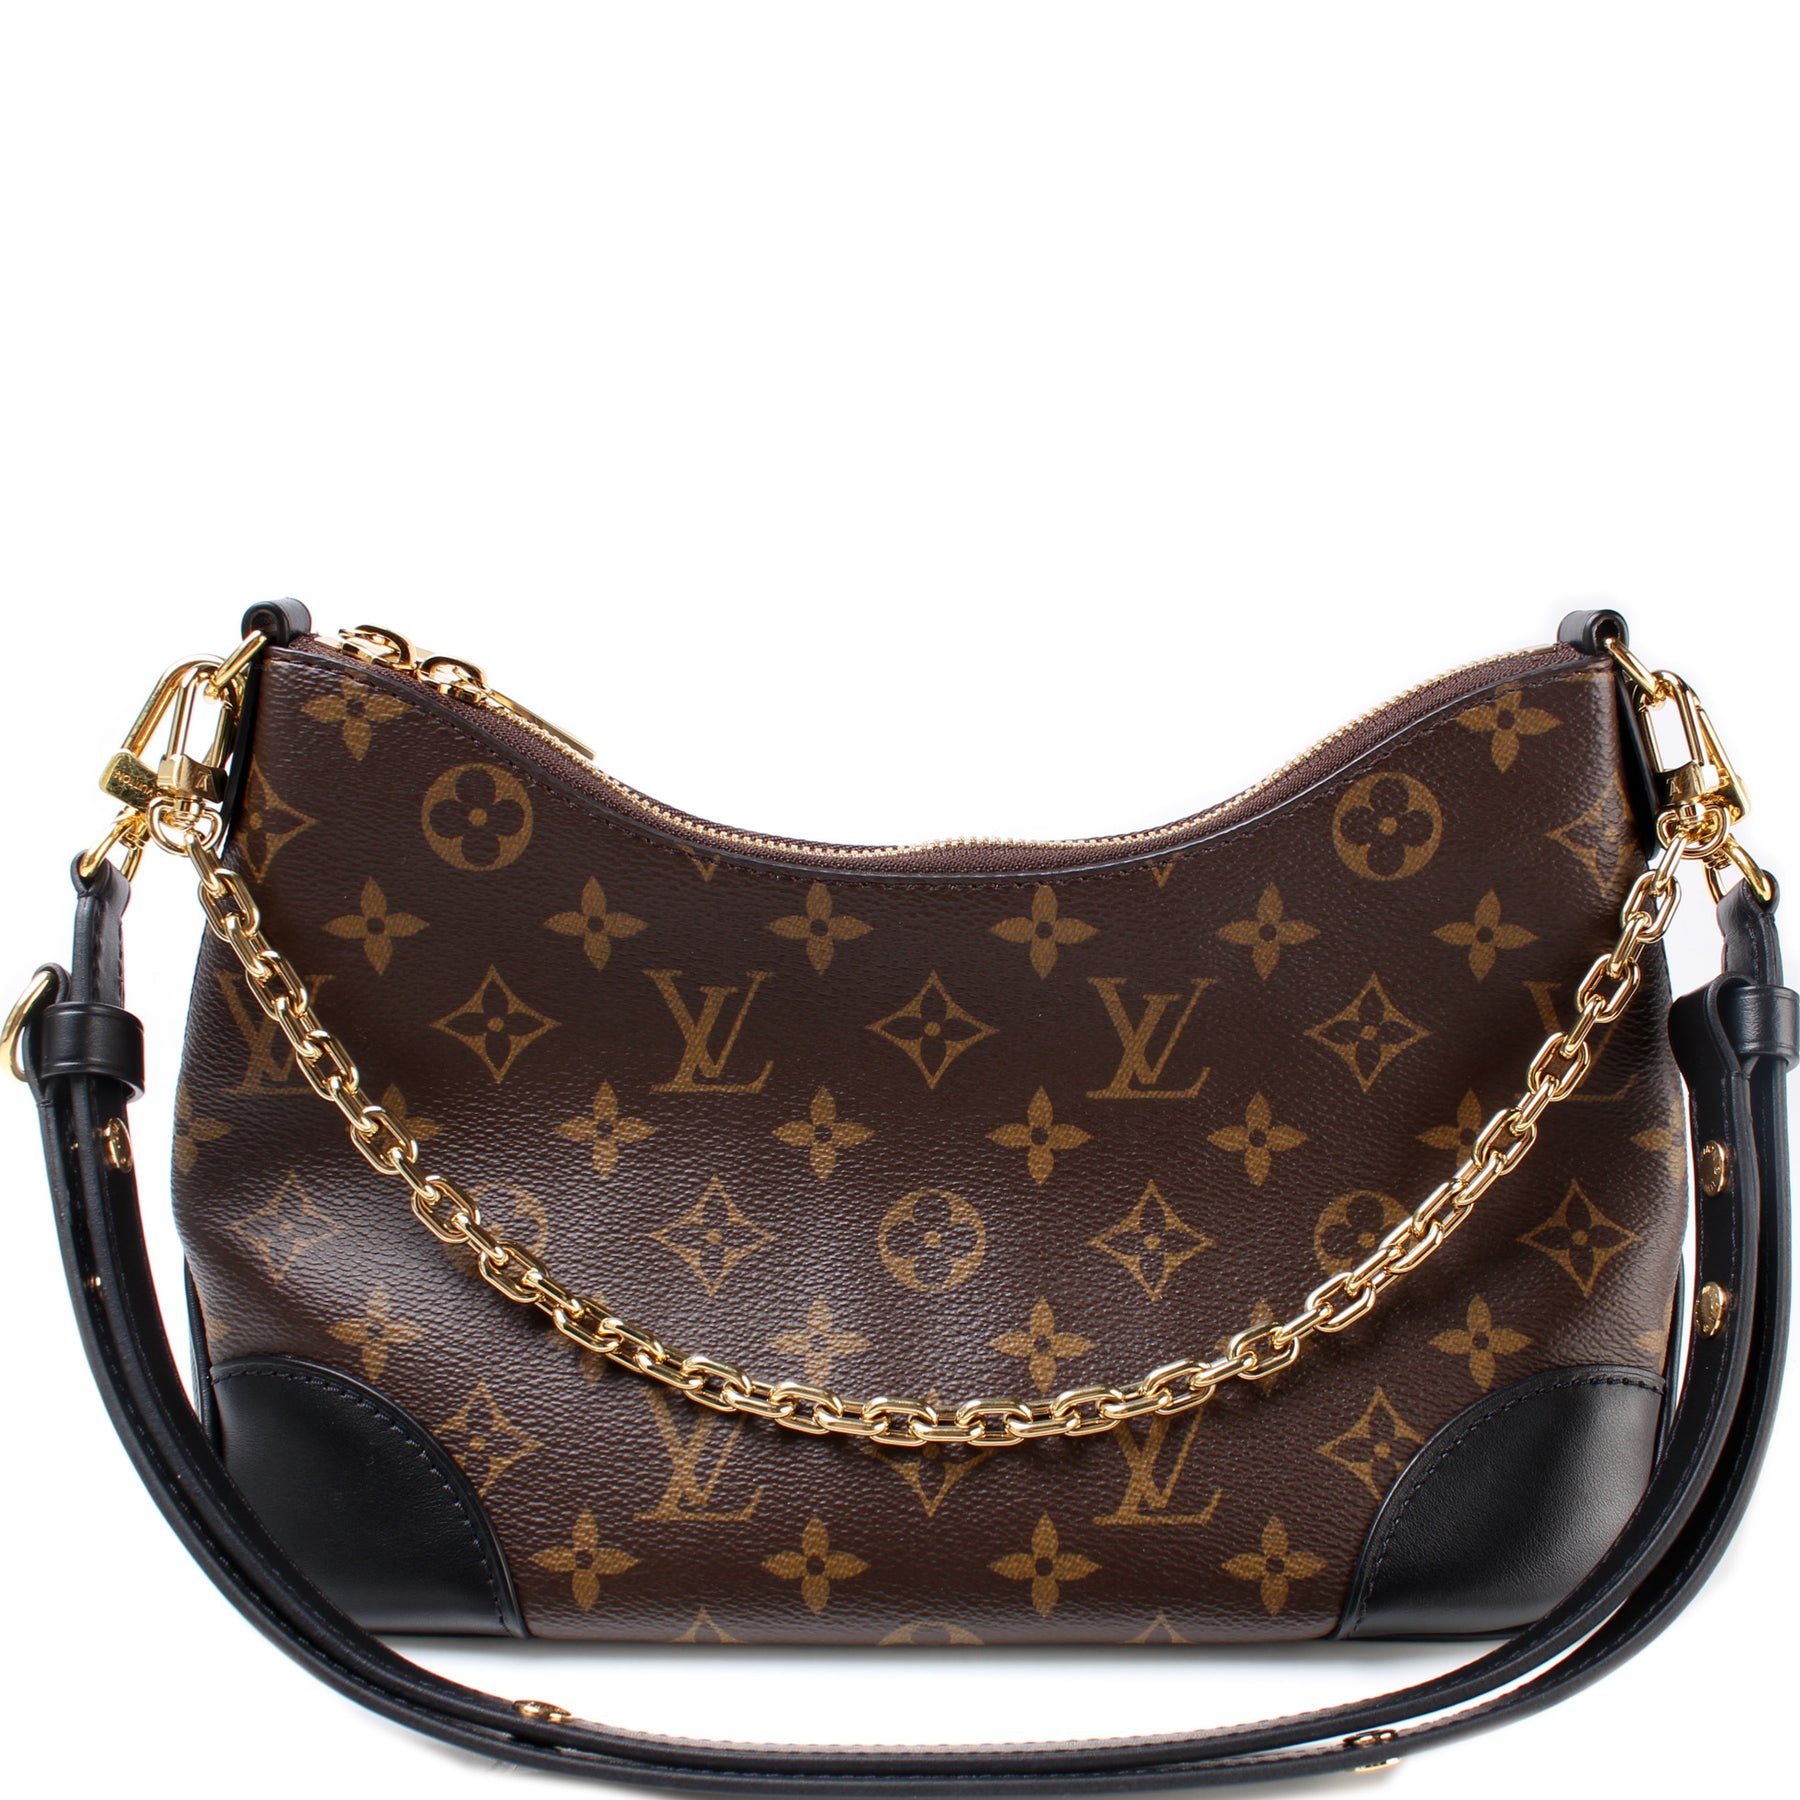 Louis Vuitton - Authenticated Boulogne Handbag - Leather Brown For Woman, Very Good condition